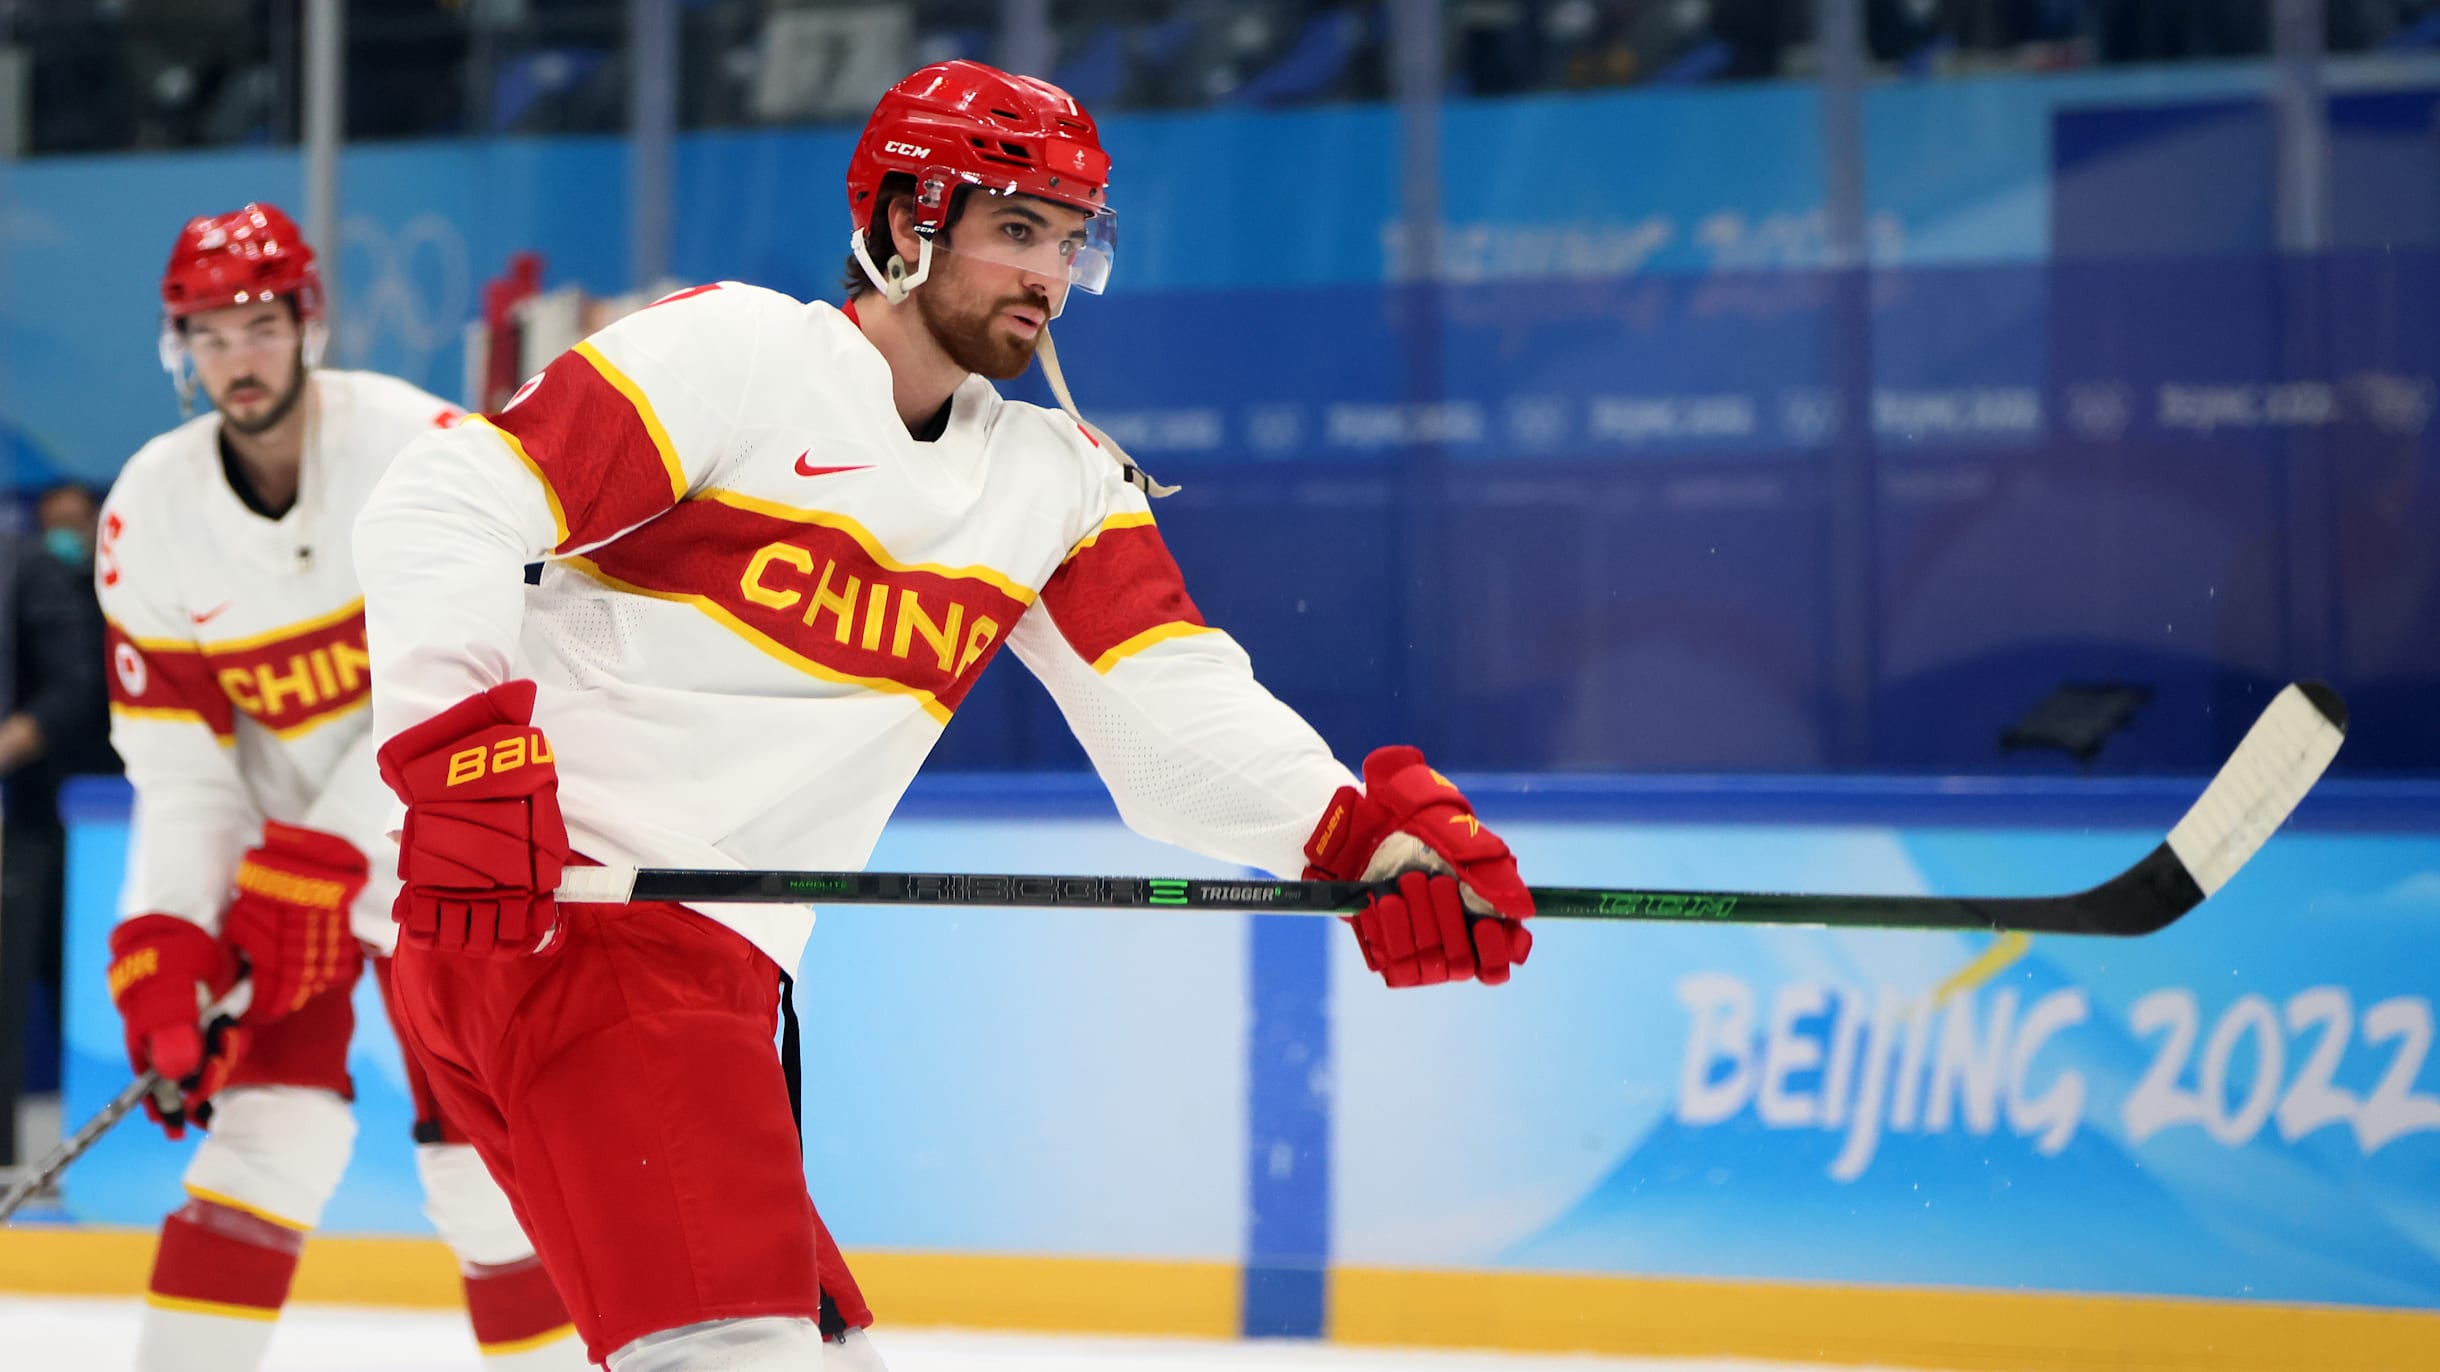 The son of NHL hero Chris Chelios is playing for China at Beijing 2022, under a new name.